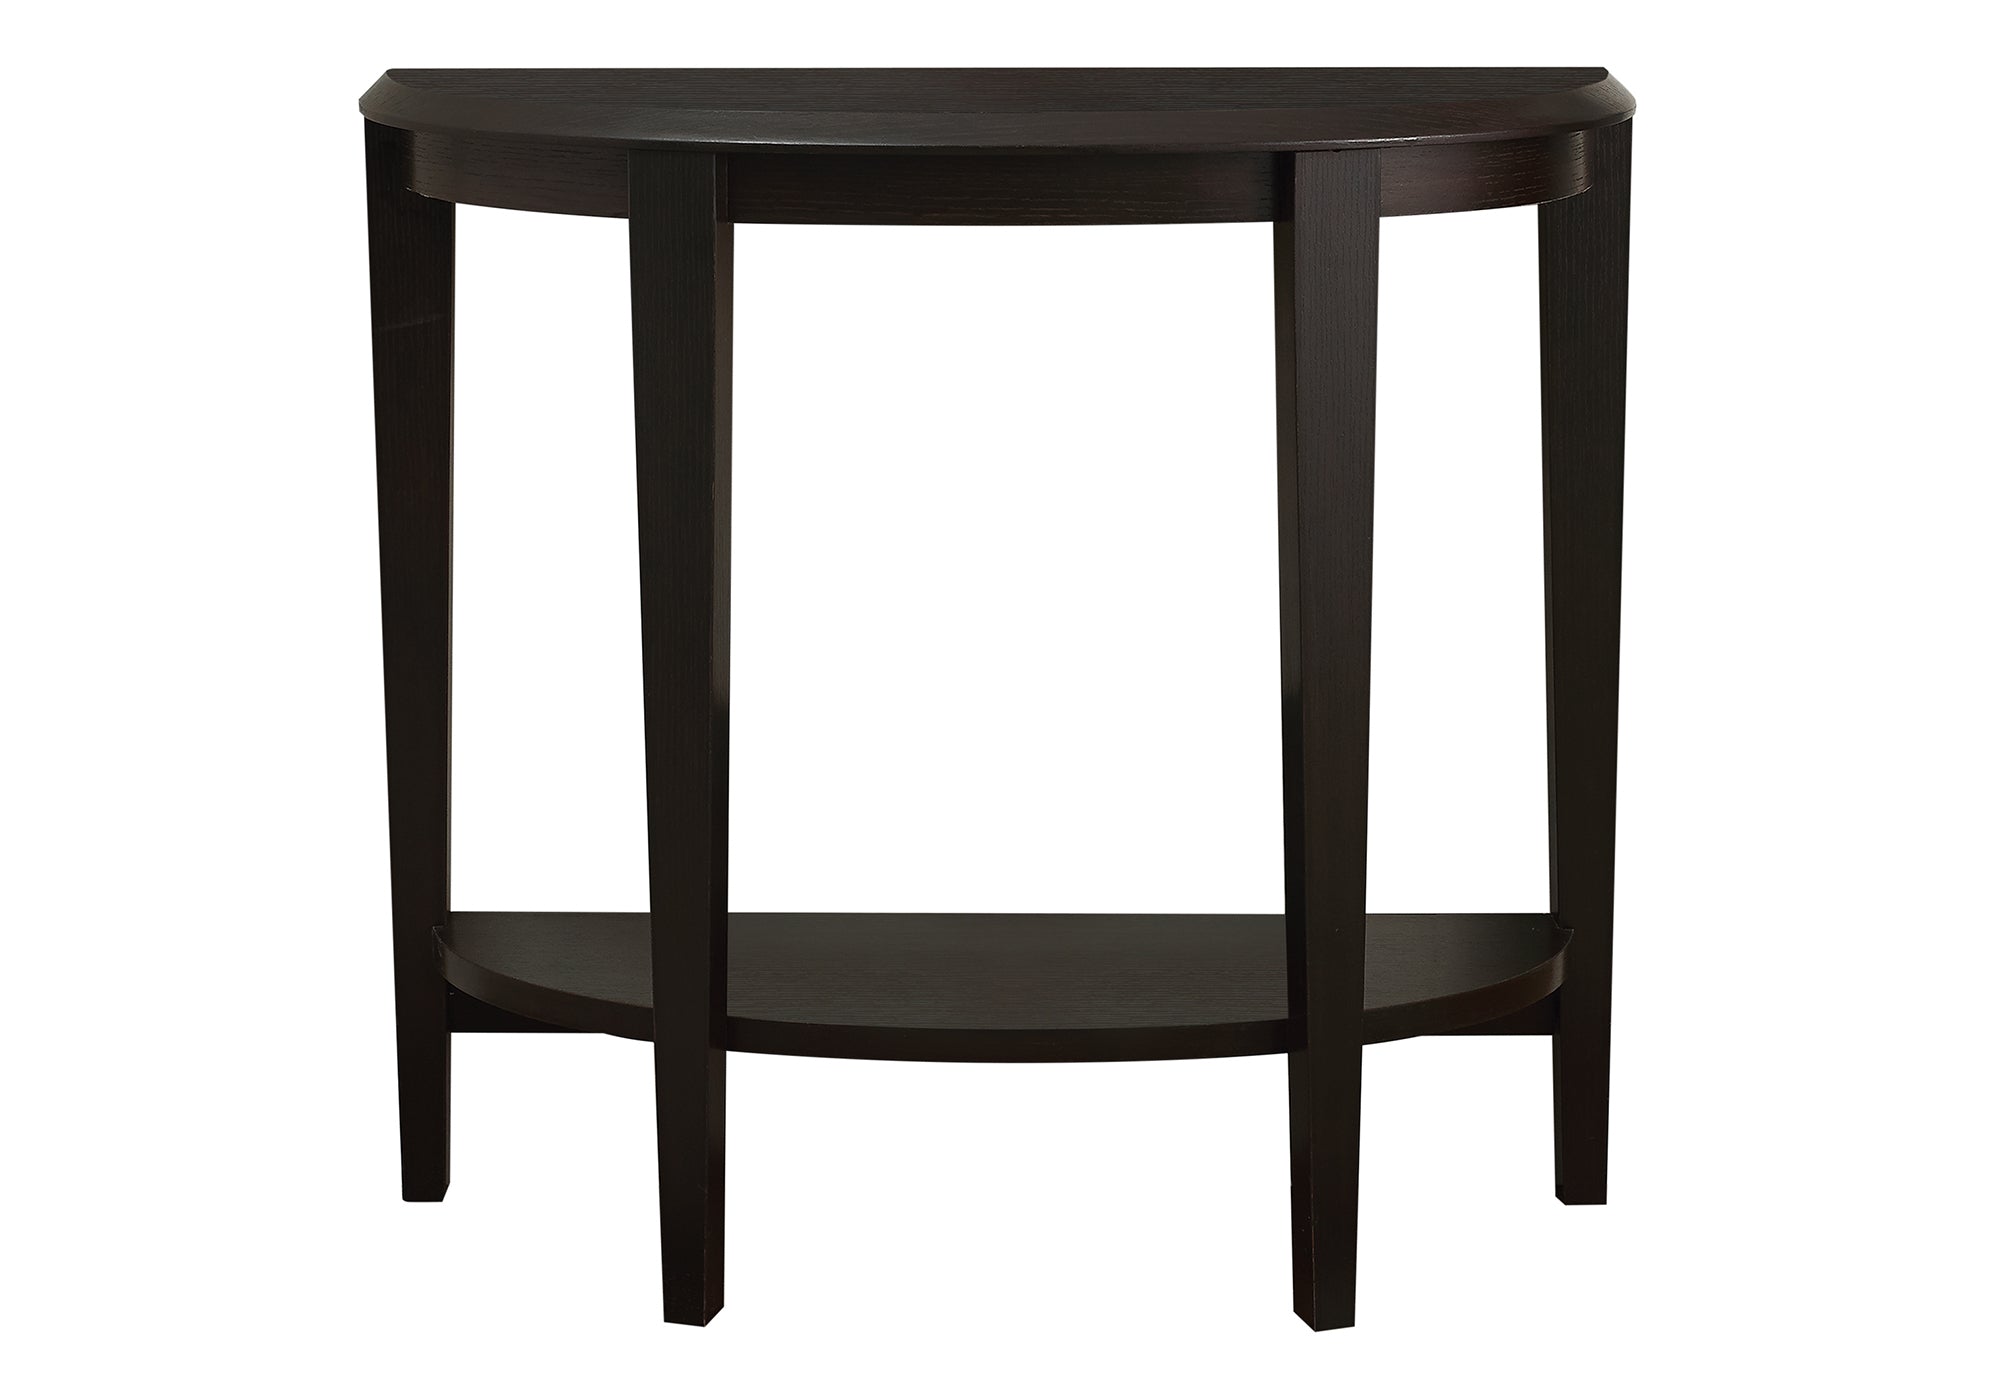 Demilune Espresso Accent Sofa Console Entryway Table With Shelf